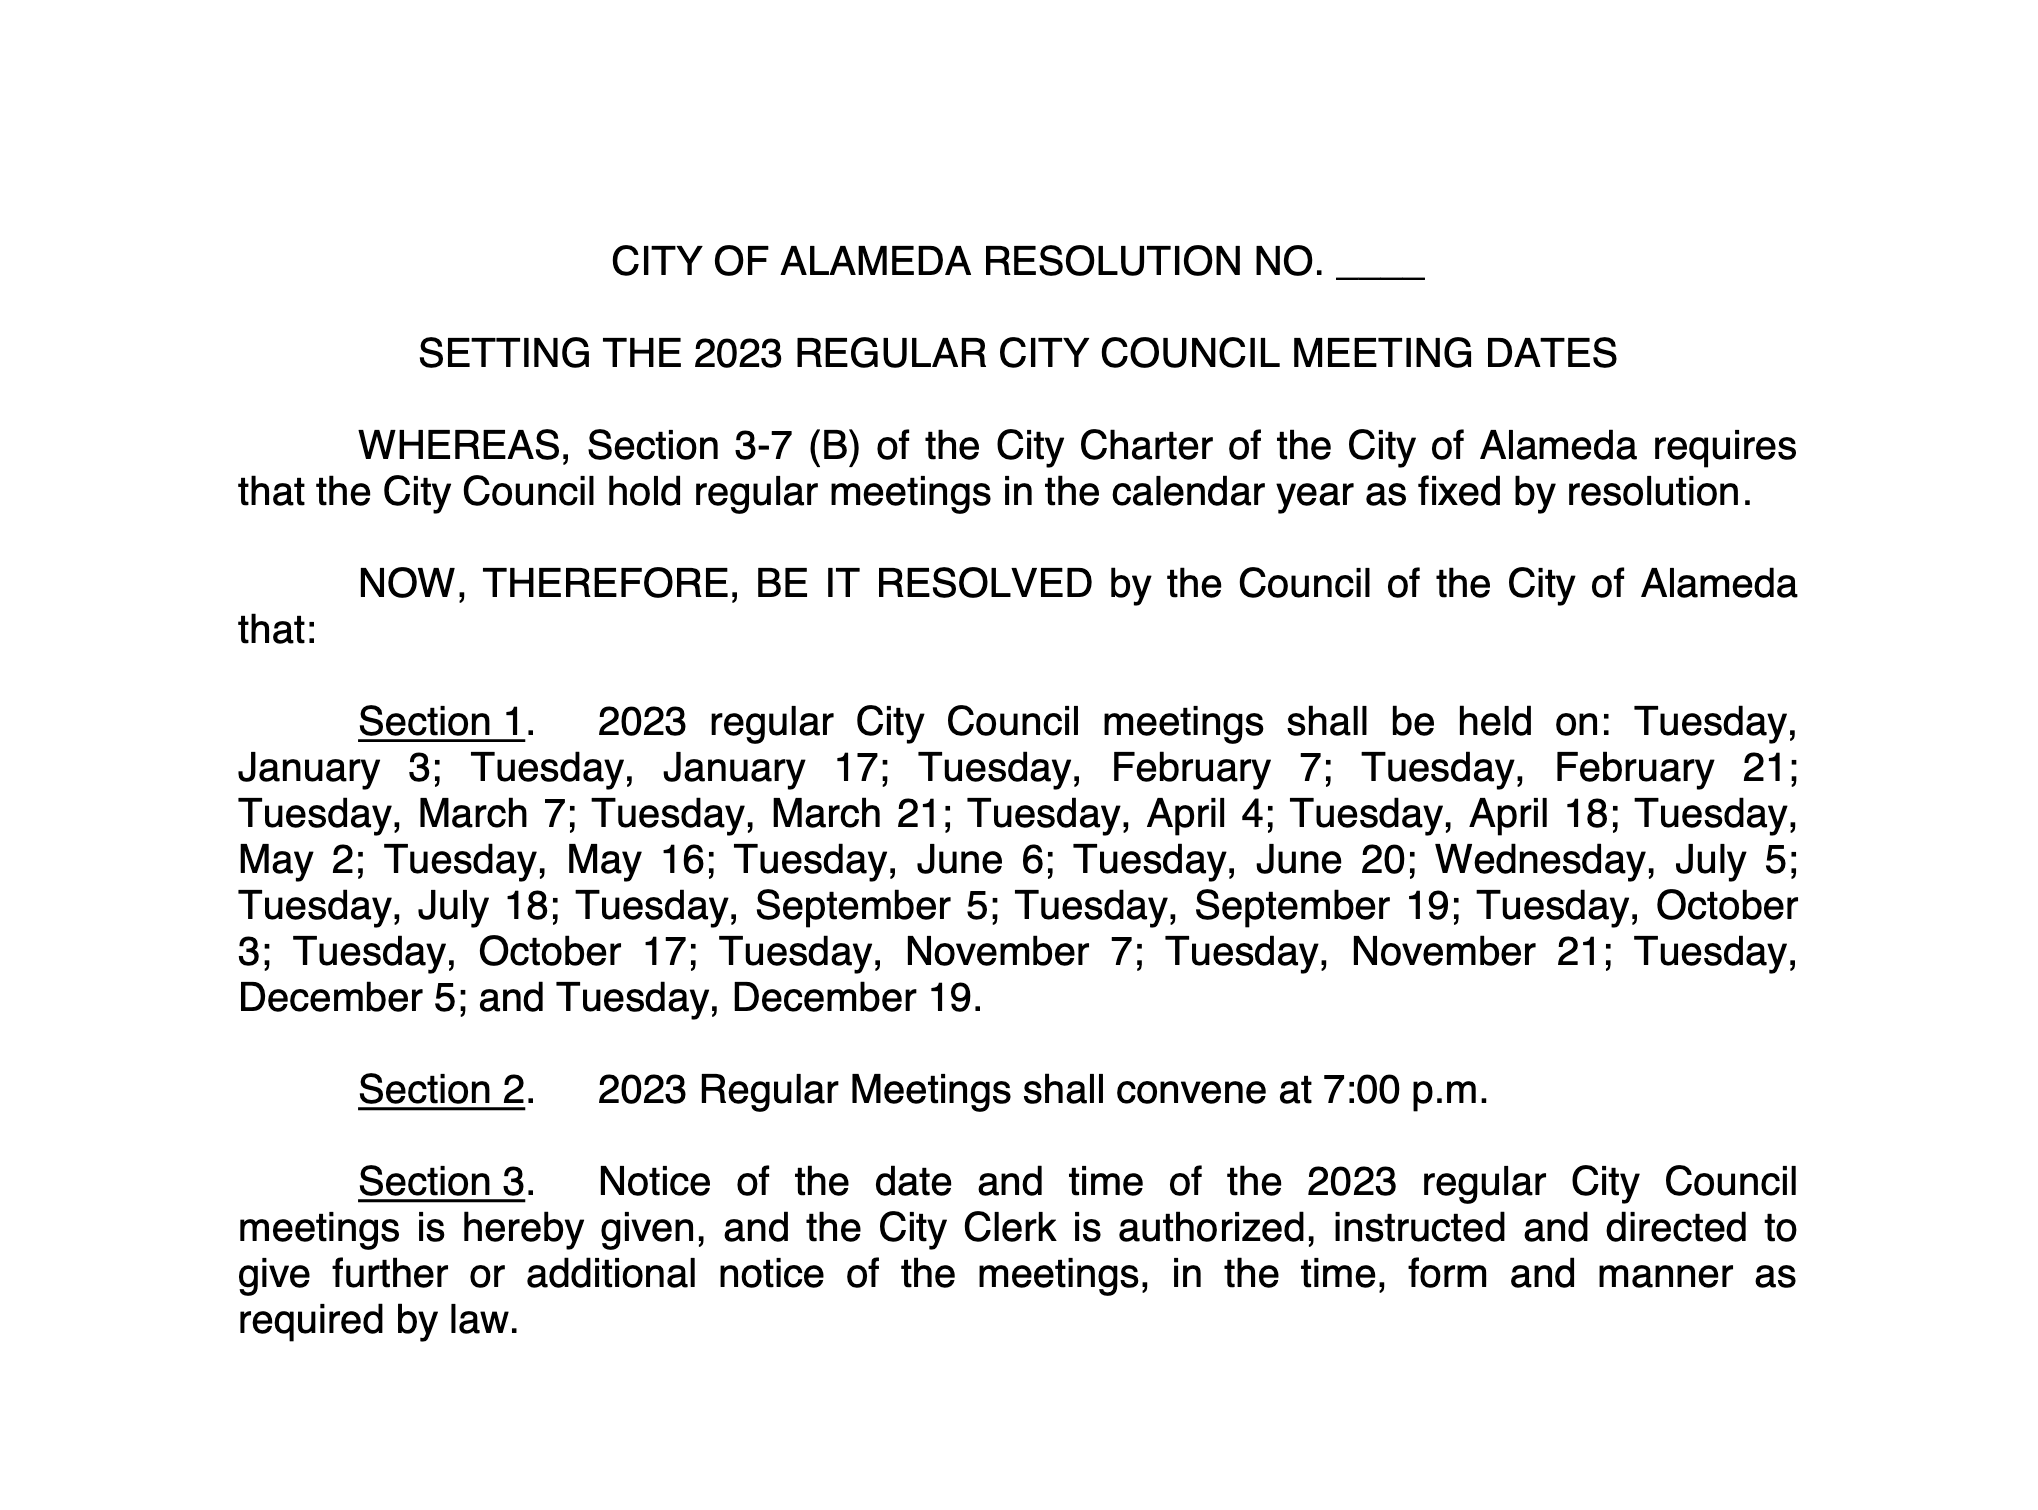  CITY OF ALAMEDA RESOLUTION NO. ____ SETTING THE 2023 REGULAR CITY COUNCIL MEETING DATES WHEREAS, Section 3-7 (B) of the City Charter of the City of Alameda requires that the City Council hold regular meetings in the calendar year as fixed by resolution. NOW, THEREFORE, BE IT RESOLVED by the Council of the City of Alameda that: Section 1. 2023 regular City Council meetings shall be held on: Tuesday, January 3; Tuesday, January 17; Tuesday, February 7; Tuesday, February 21; Tuesday, March 7; Tuesday, March 21; Tuesday, April 4; Tuesday, April 18; Tuesday, May 2; Tuesday, May 16; Tuesday, June 6; Tuesday, June 20; Wednesday, July 5; Tuesday, July 18; Tuesday, September 5; Tuesday, September 19; Tuesday, October 3; Tuesday, October 17; Tuesday, November 7; Tuesday, November 21; Tuesday, December 5; and Tuesday, December 19. Section 2. 2023 Regular Meetings shall convene at 7:00 p.m. Section 3. Notice of the date and time of the 2023 regular City Council meetings is hereby given, and the City Clerk is authorized, instructed and directed to give further or additional notice of the meetings, in the time, form and manner as required by law. * * * * * * I, the undersigned, hereby certify that the foregoing Resolution was duly and regularly adopted and passed by the Council of the City of Alameda in regular meeting assembled on the 20th day of December 2022, by the following vote to wit: AYES: NOES: ABSENT: ABSTENTIONS: IN WITNESS, WHEREOF, I have hereunto set my hand and affixed the official seal of the said City this 21st day of December 2022. Lara Weisiger, City Clerk City of Alameda Approved as to Form: ________________________ Yibin Shen, City Attorney, City of Alameda